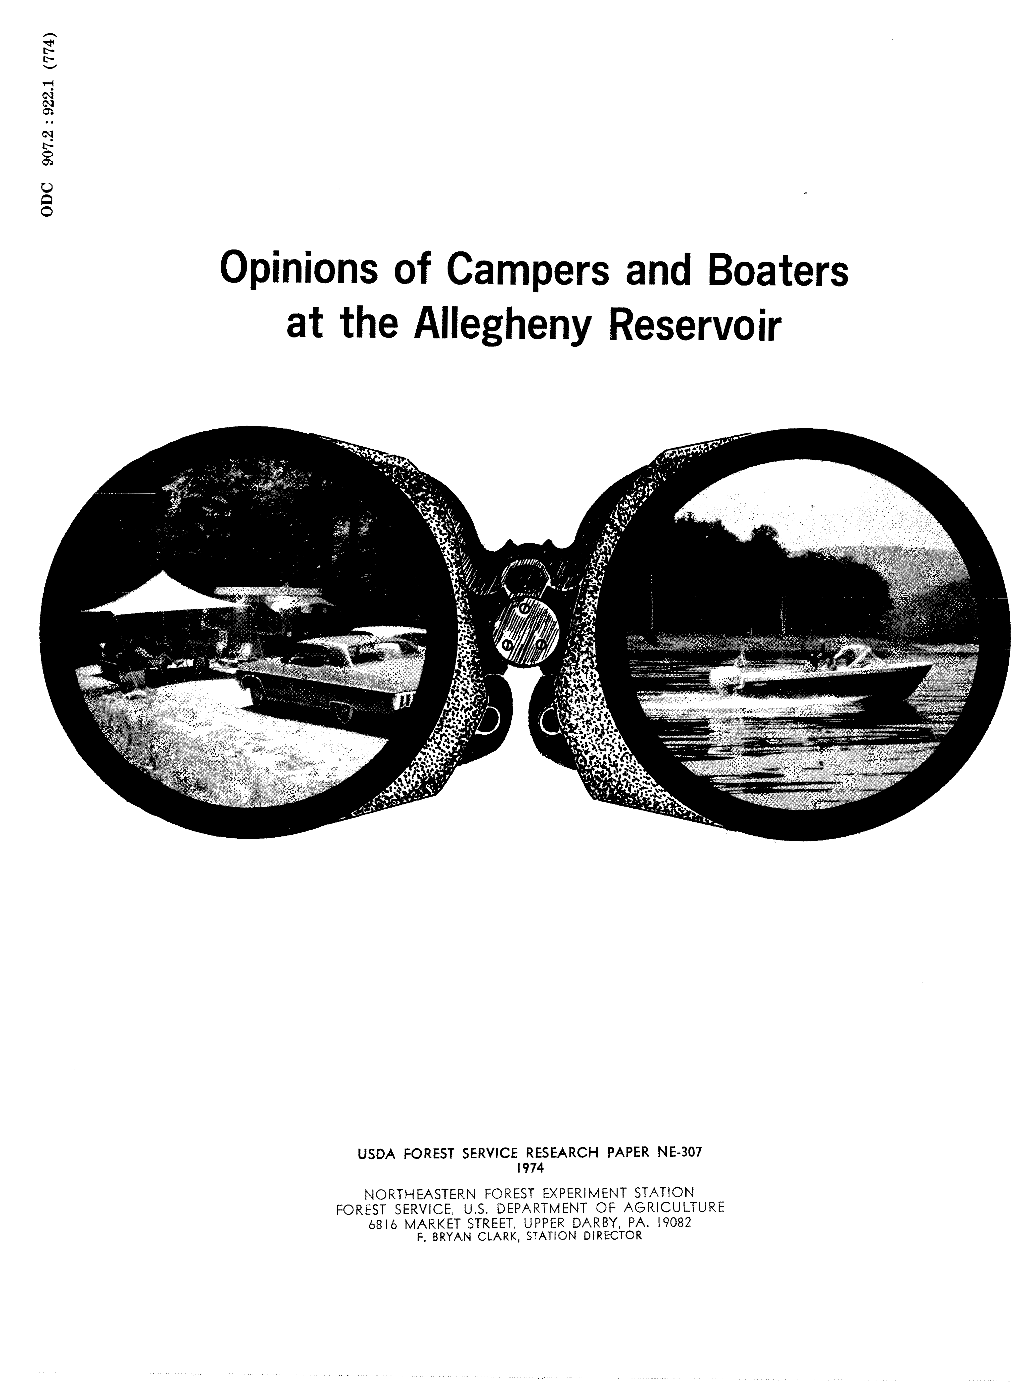 Opinions of Campers and Boaters at the Allegheny Reservoir